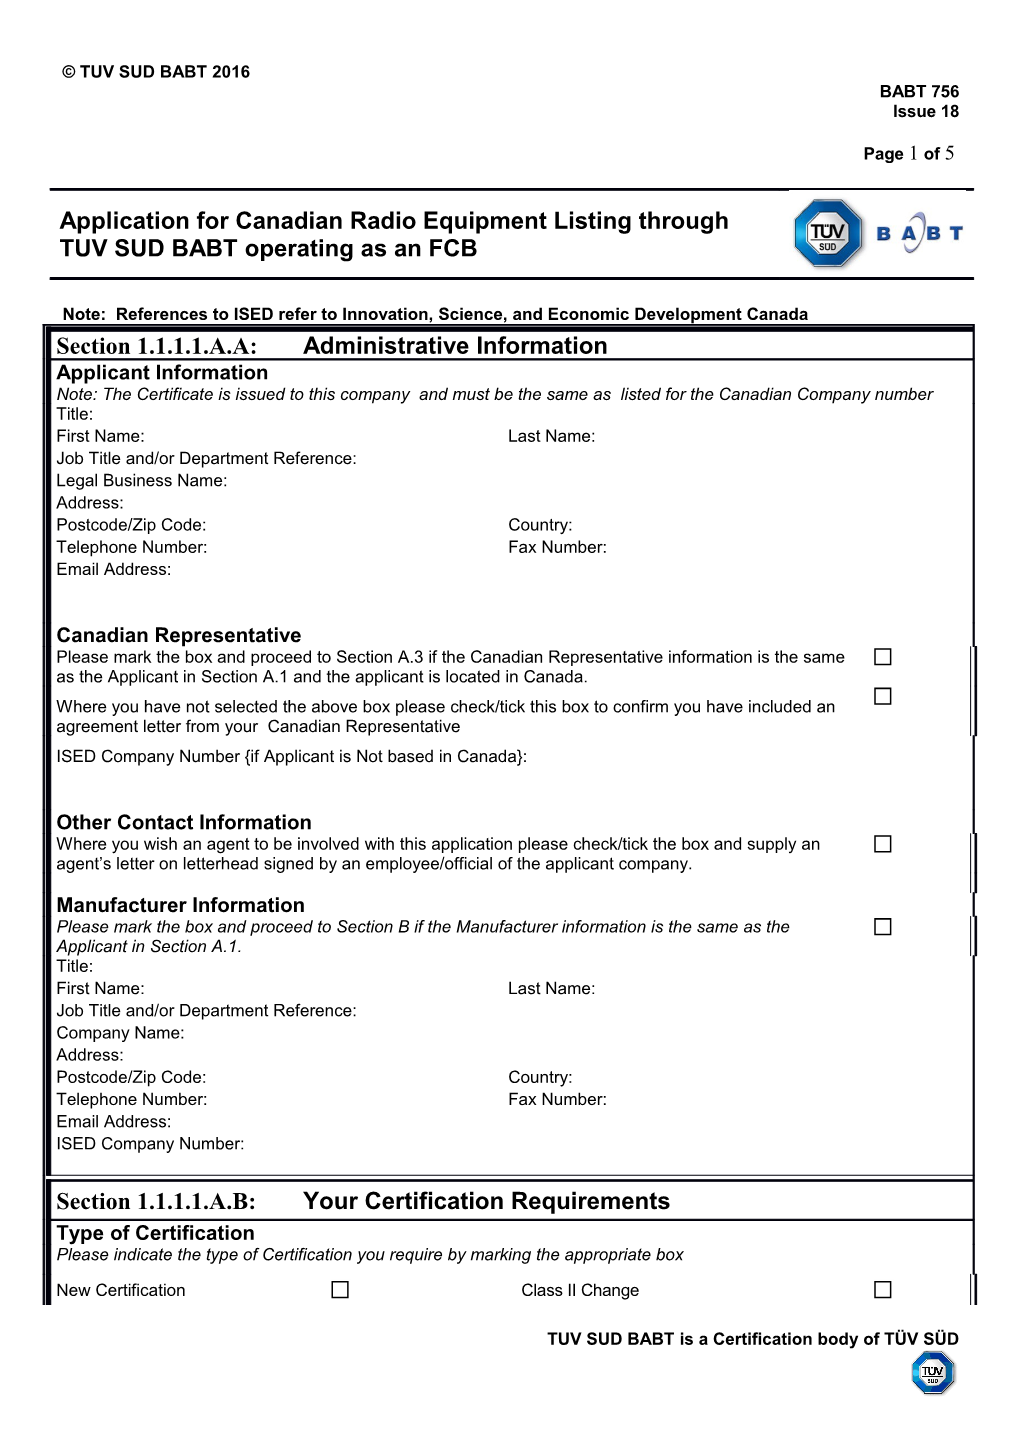 Application for Canadian Radio Equipment Listing Through TUV SUD BABT Operating As an FCB